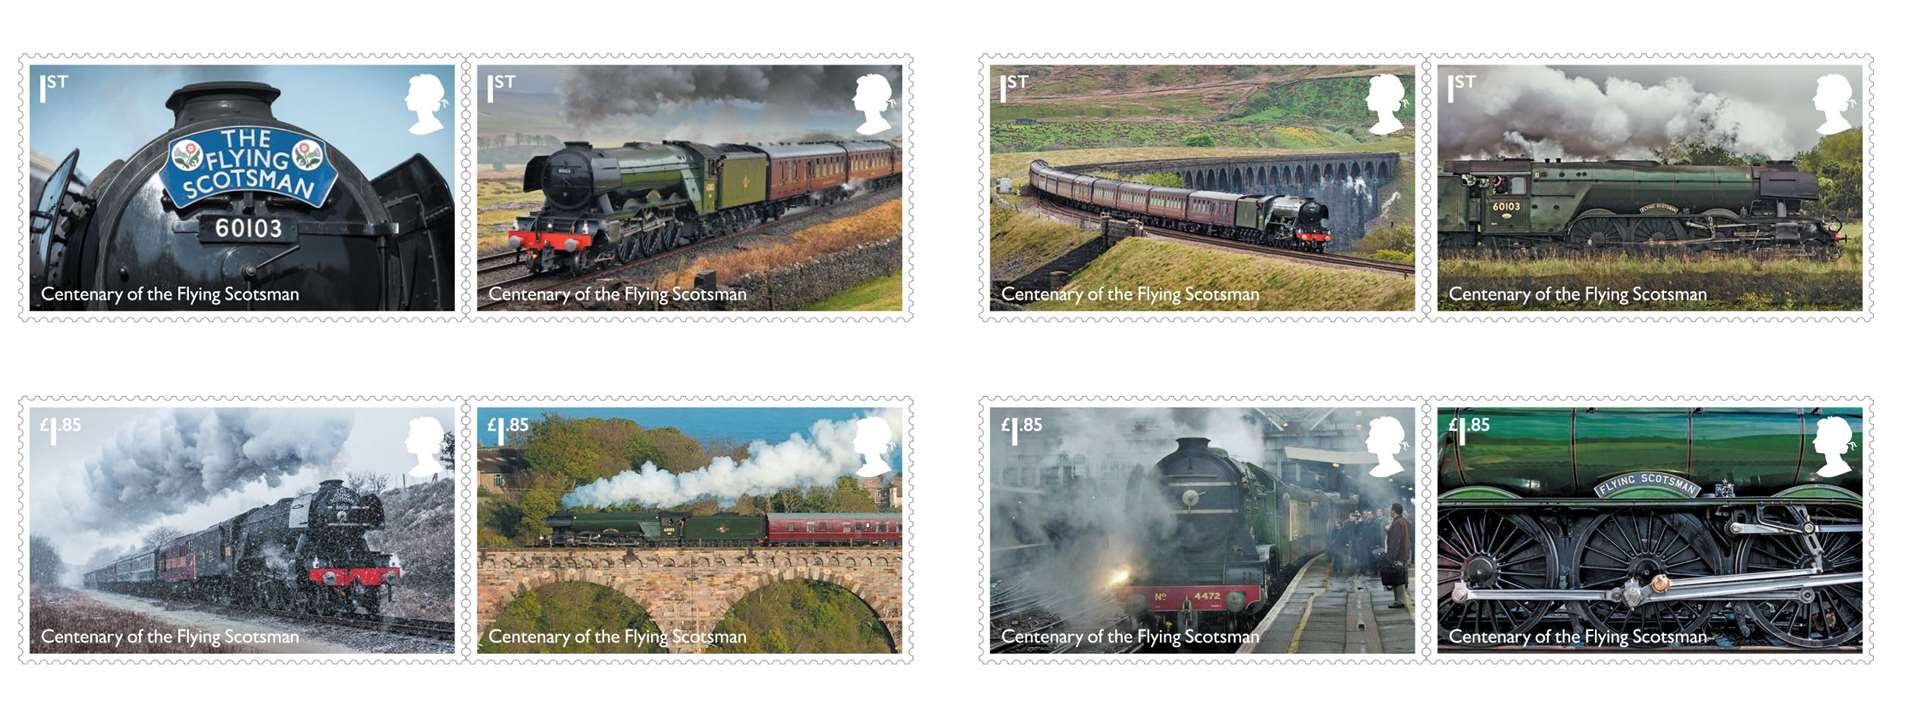 The stamps will be available to buy in March